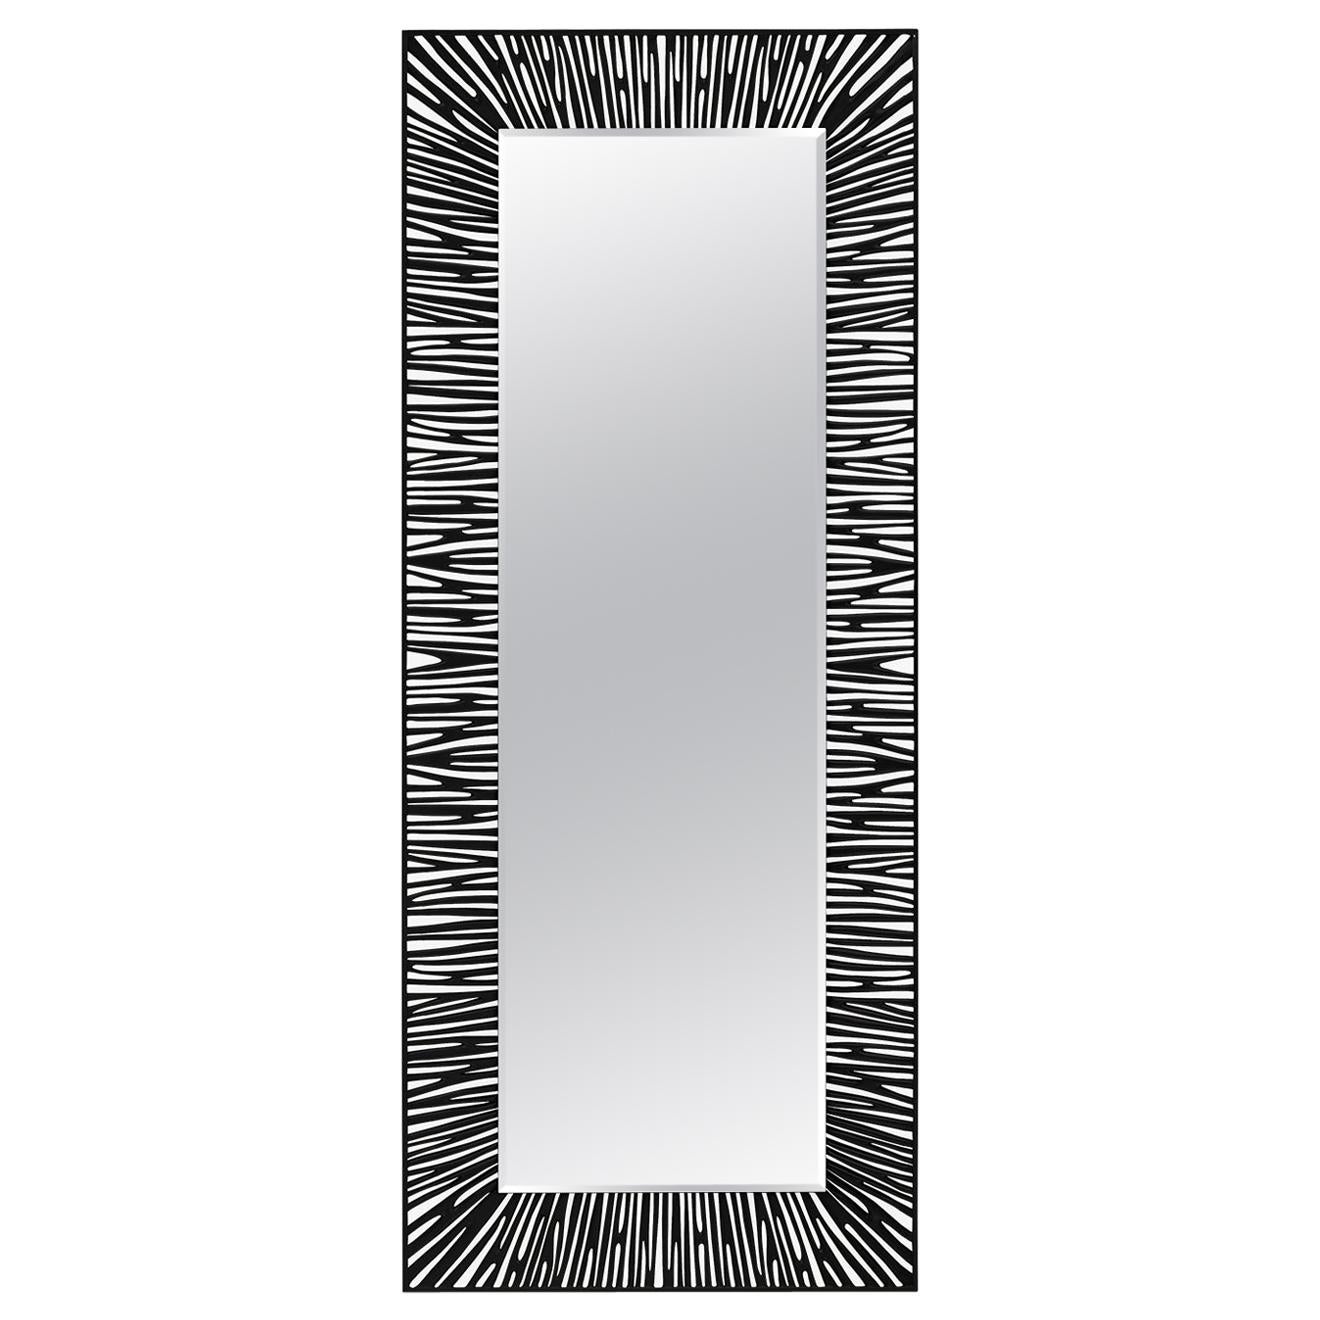 Twiggy High Mirror in Black or Silver or Gold For Sale